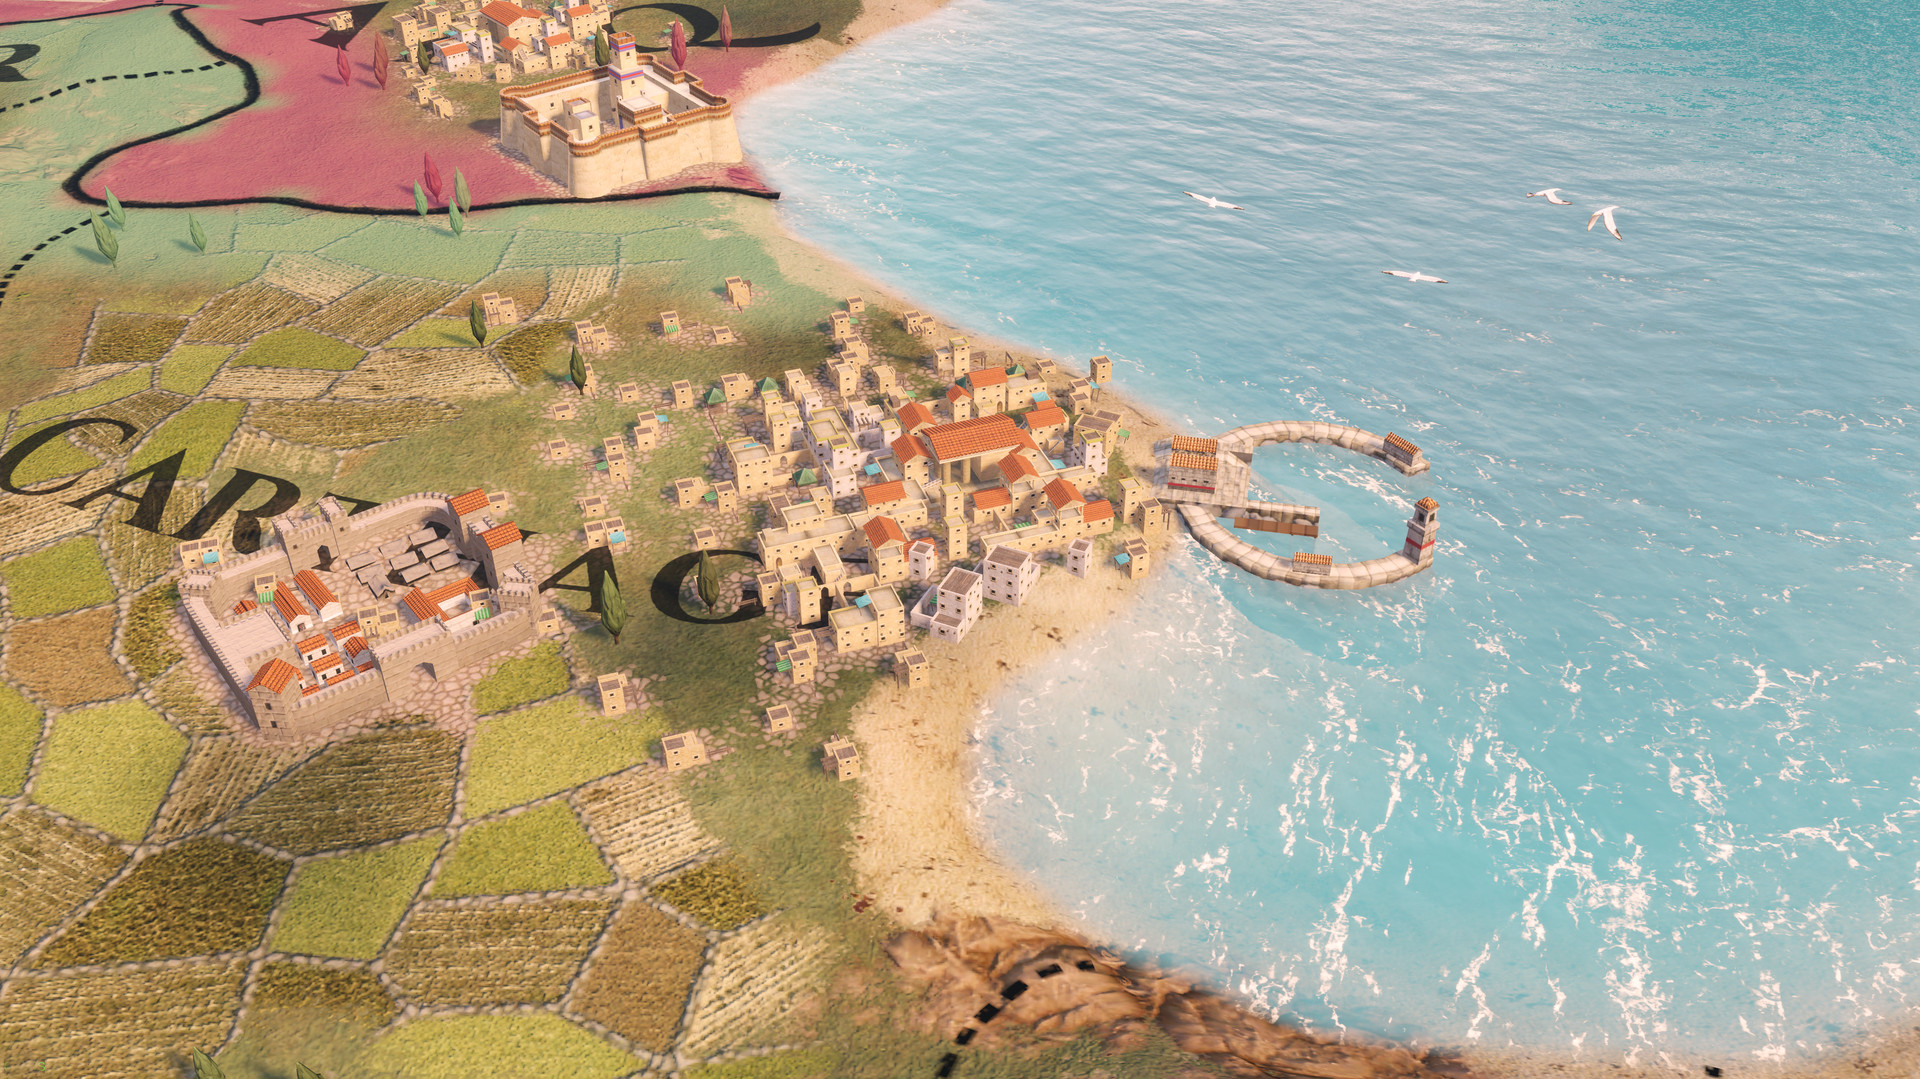 Imperator: Rome - The Punic Wars Content Pack Featured Screenshot #1